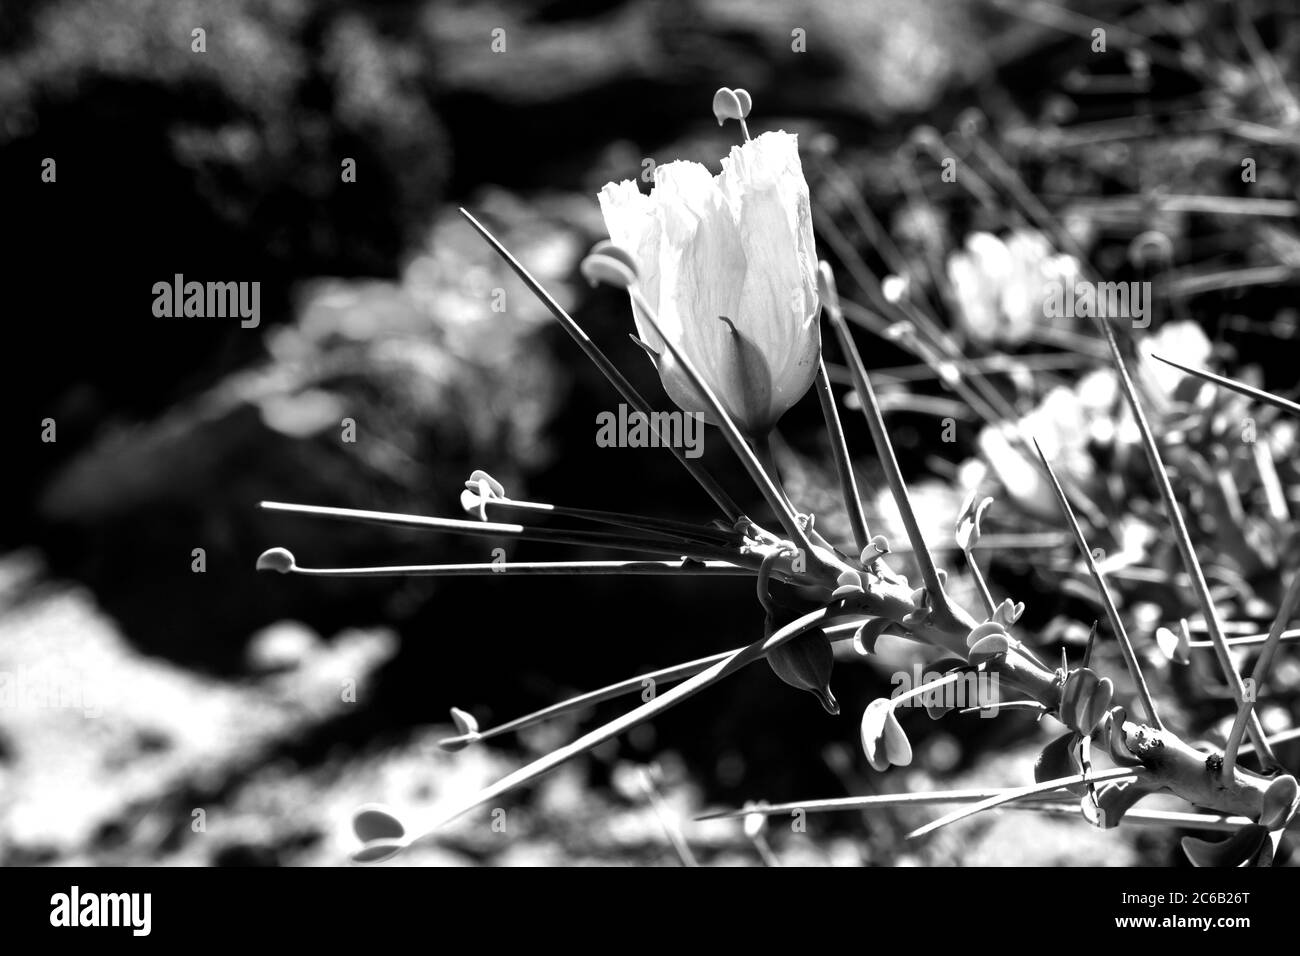 The delicate large flower of the Sarcocaulon Crassicaule, known as the Bushman's candle, surrounded by its large thorns, photographed in monochrome Stock Photo